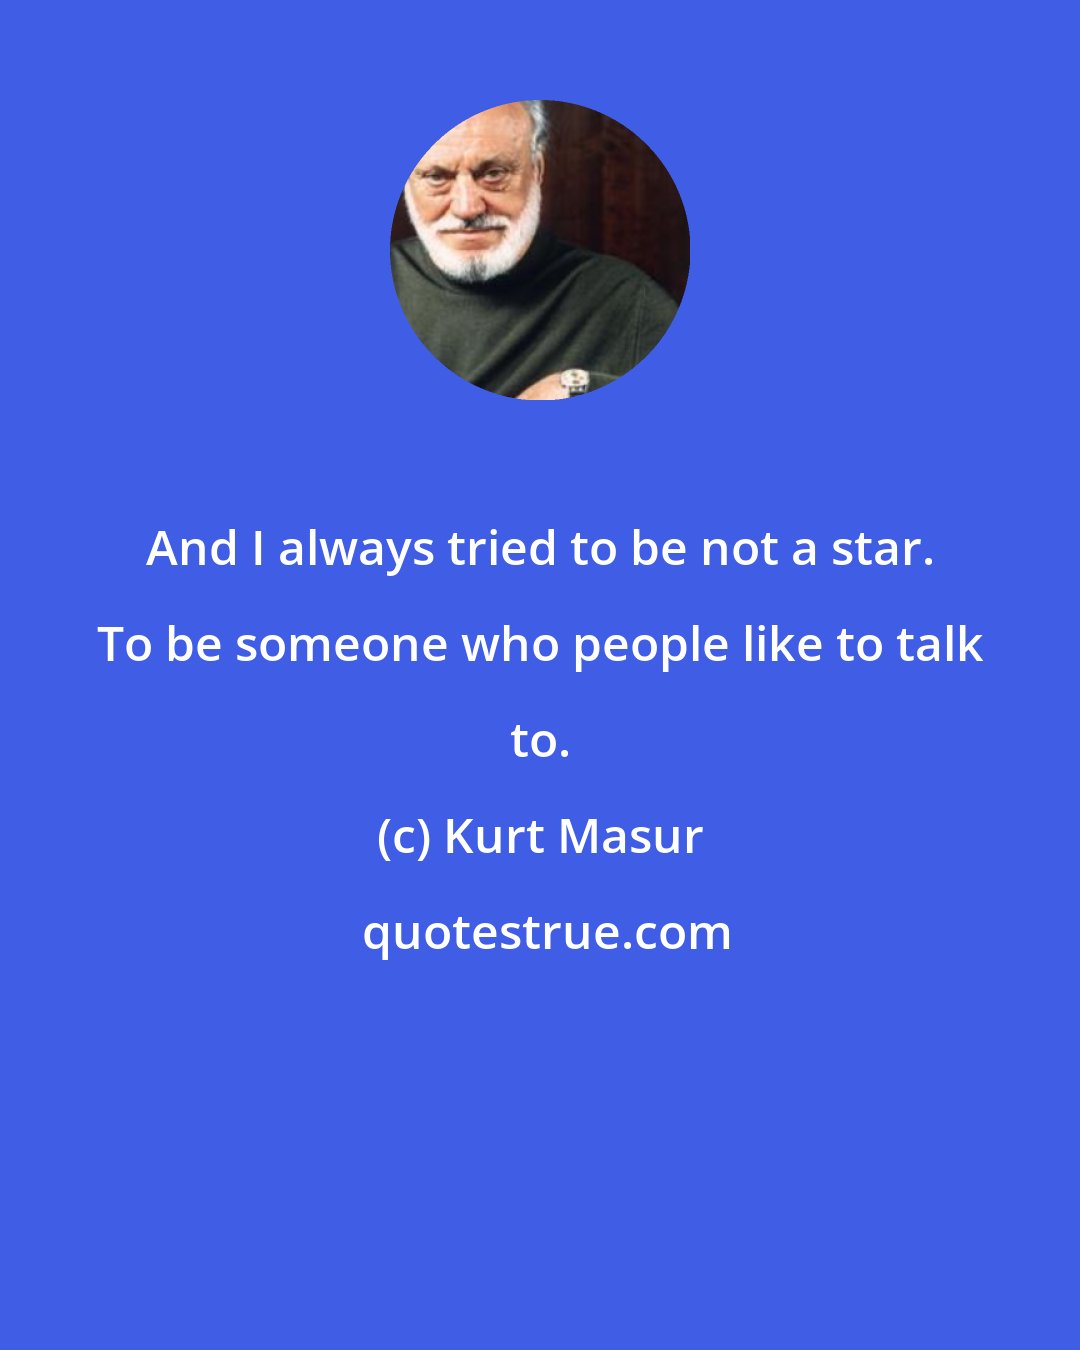 Kurt Masur: And I always tried to be not a star. To be someone who people like to talk to.